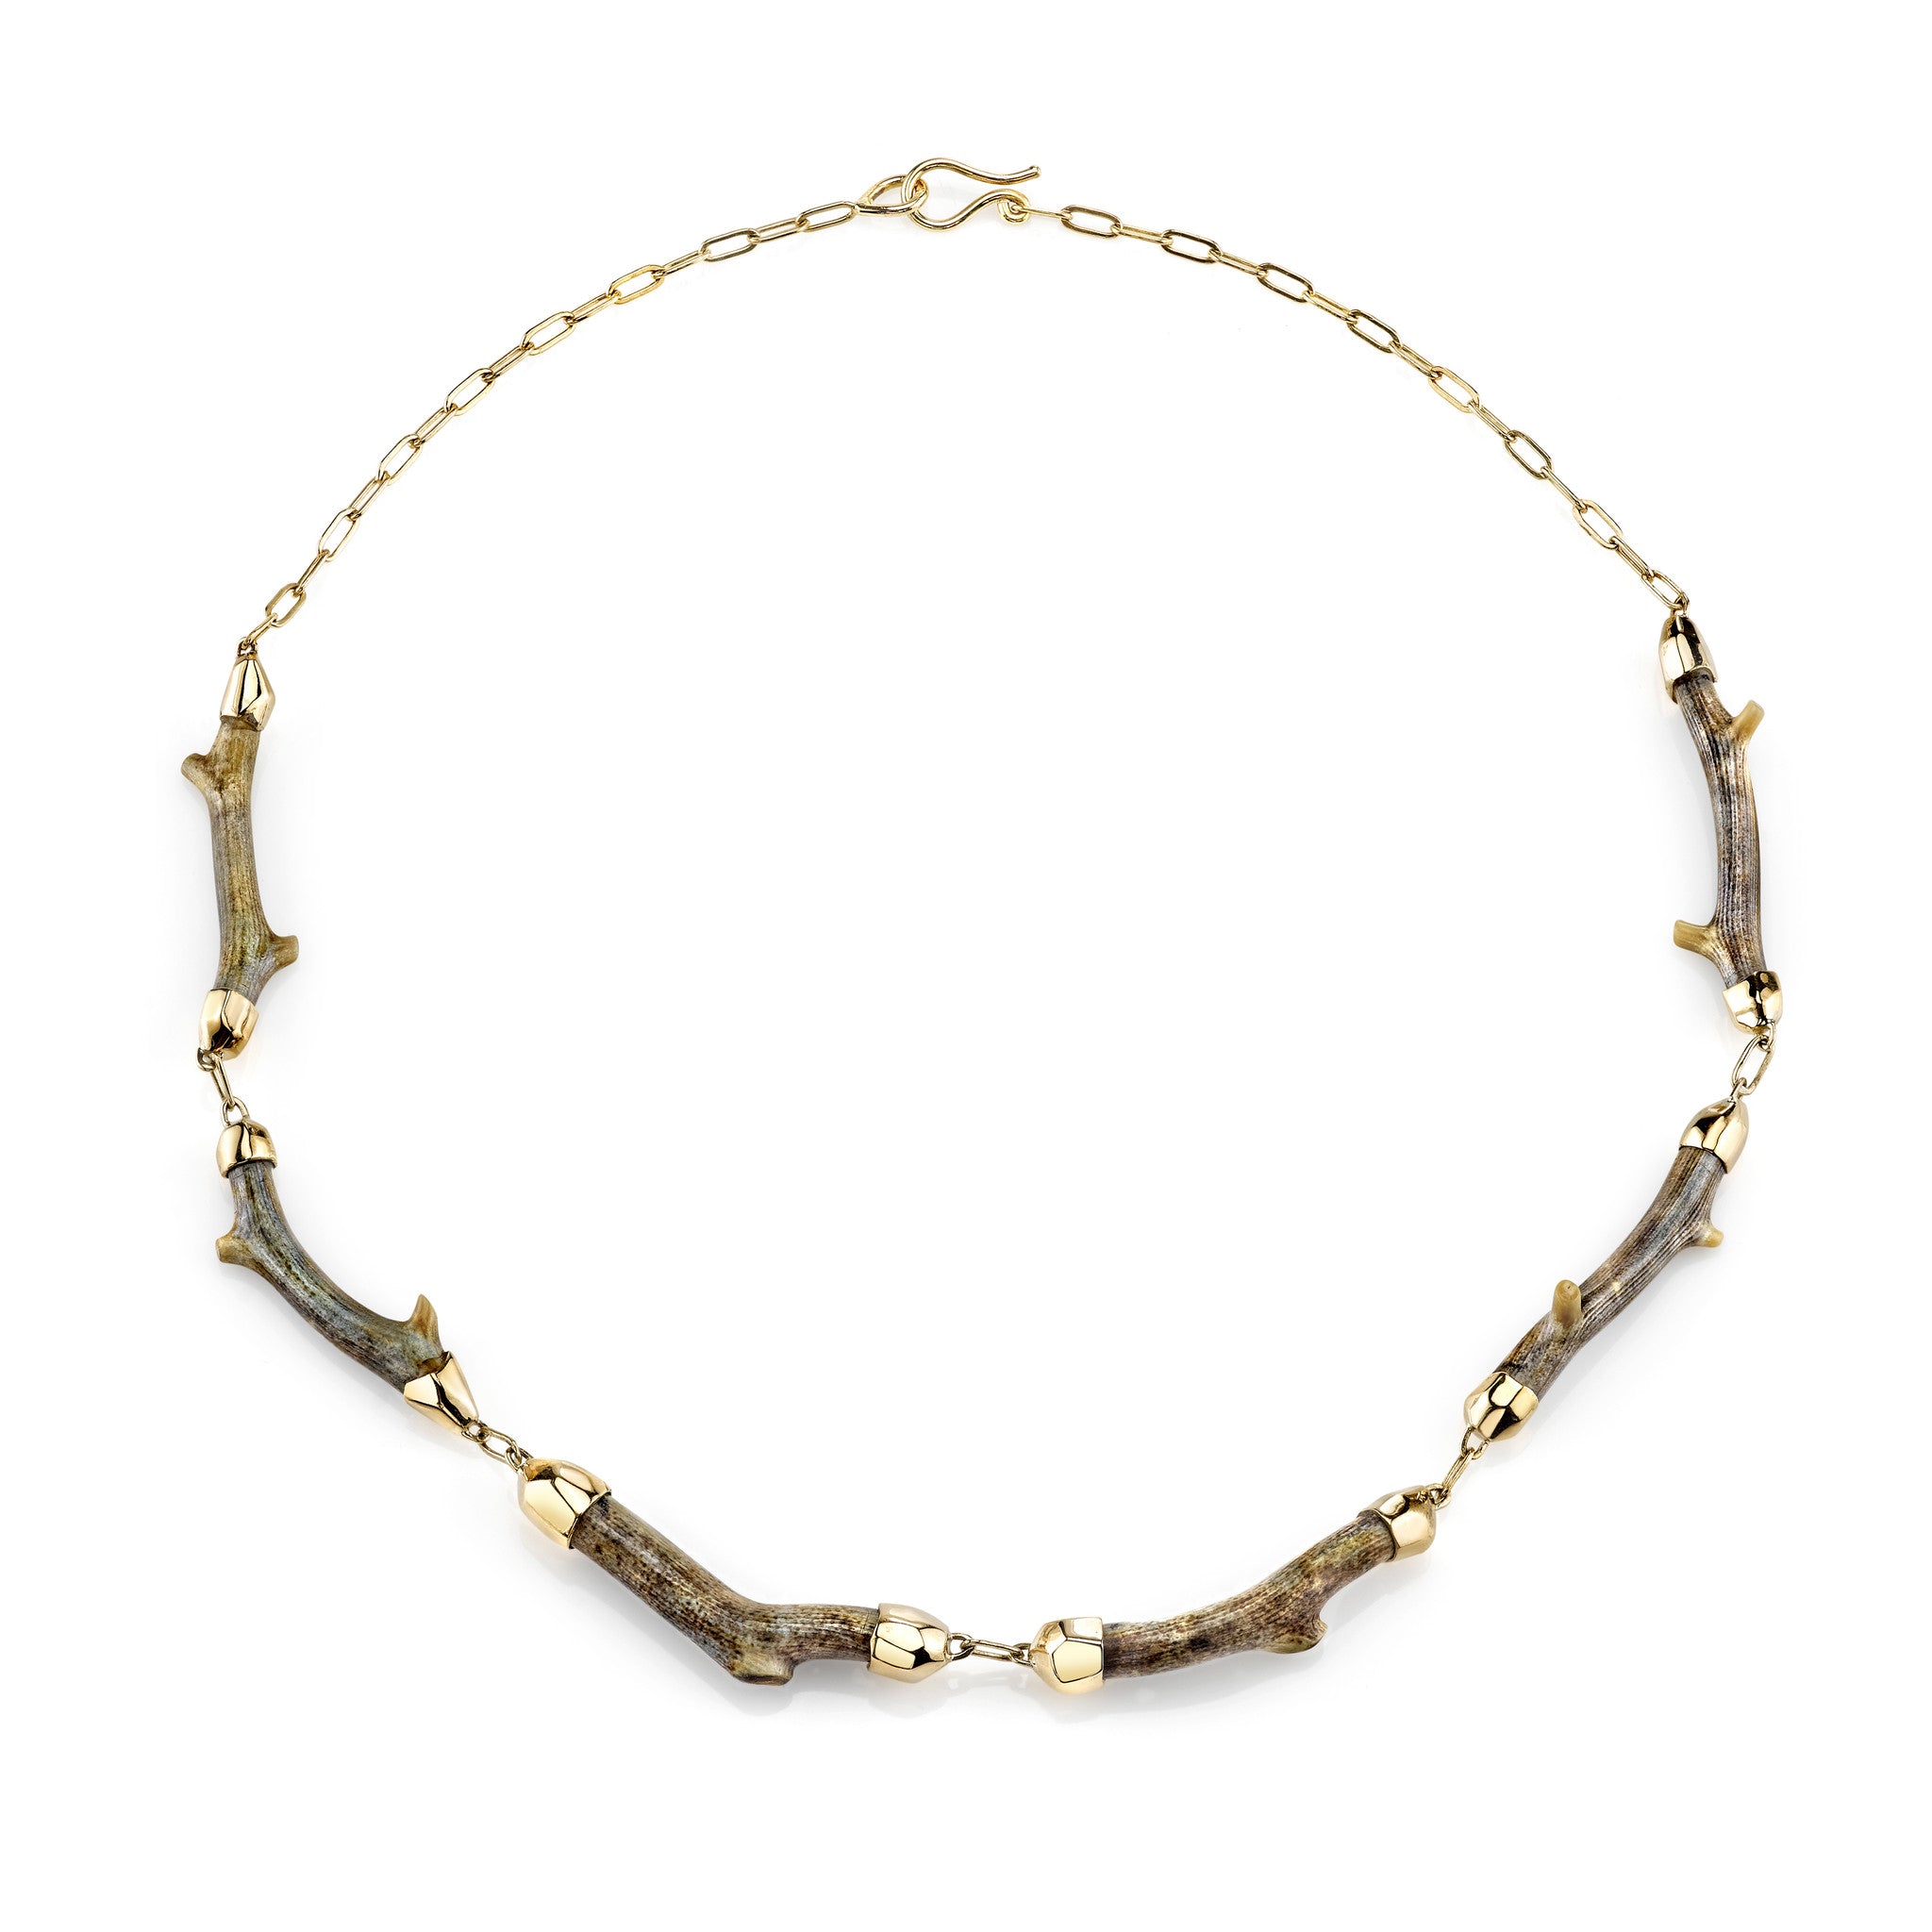 The Bering Clavicle Necklace